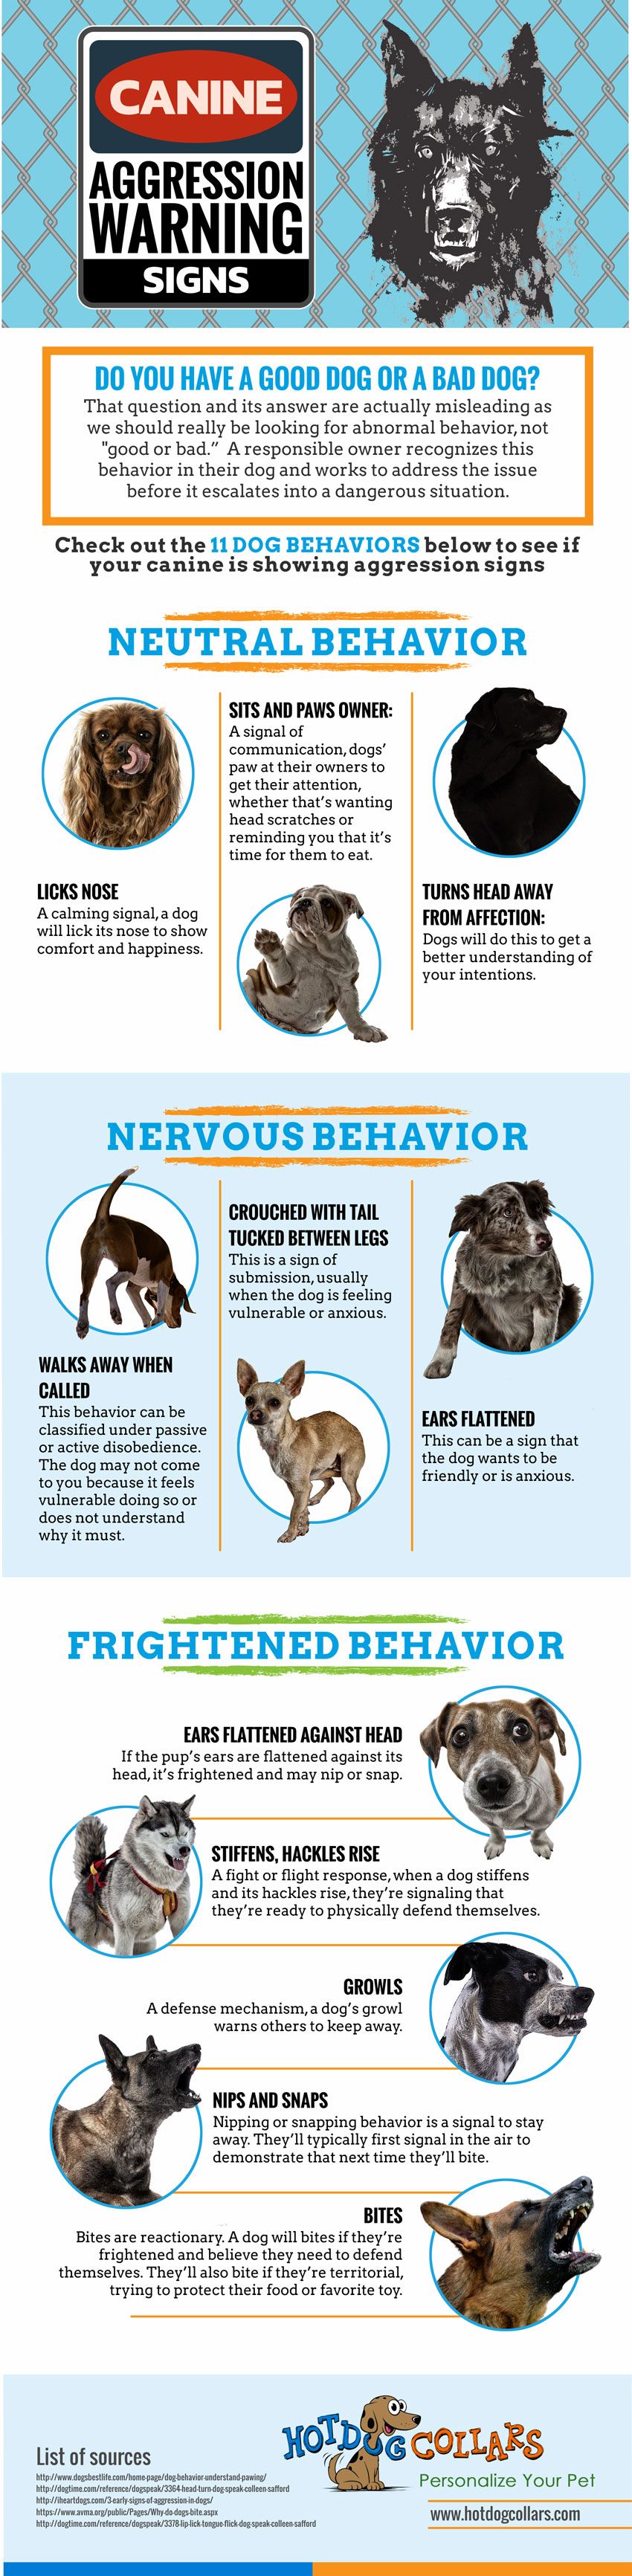 Canine Aggression Warning Signs